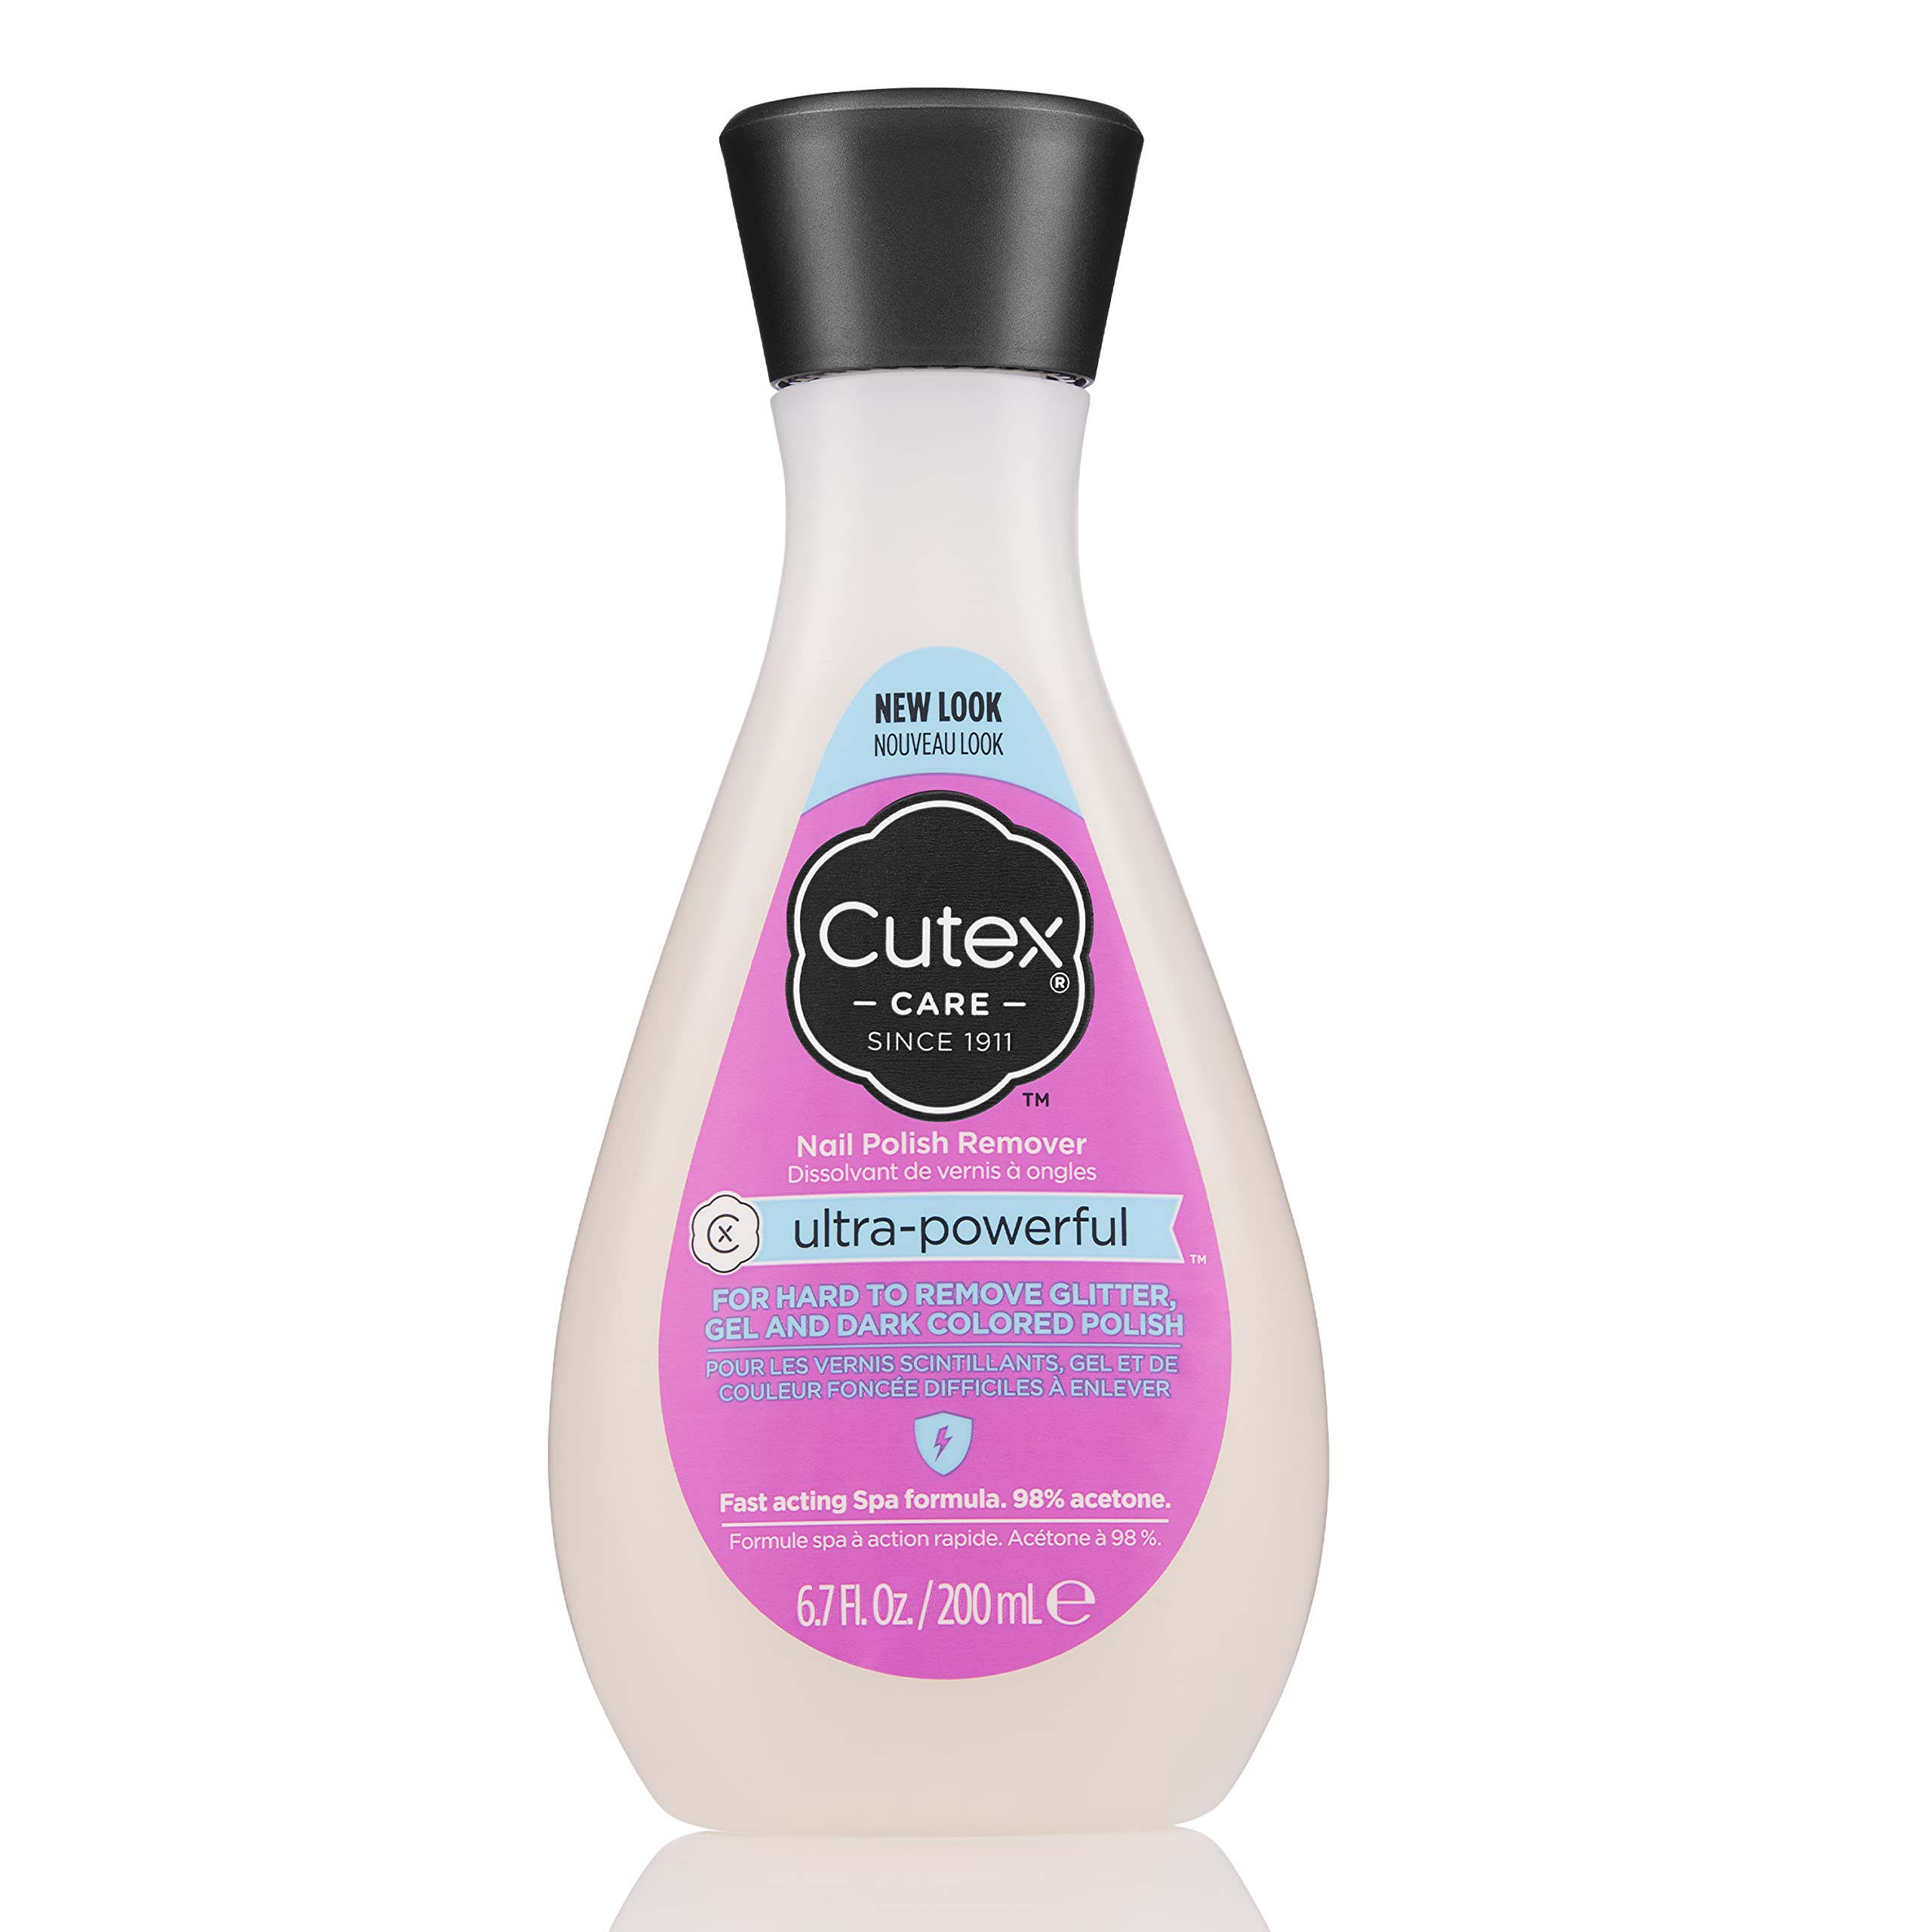 Gel Nail Polish Remover by Cutex, Ultra-Powerful & Removes Glitter and Dark Colored Paints, Paraben Free, 6.76 Fl Oz